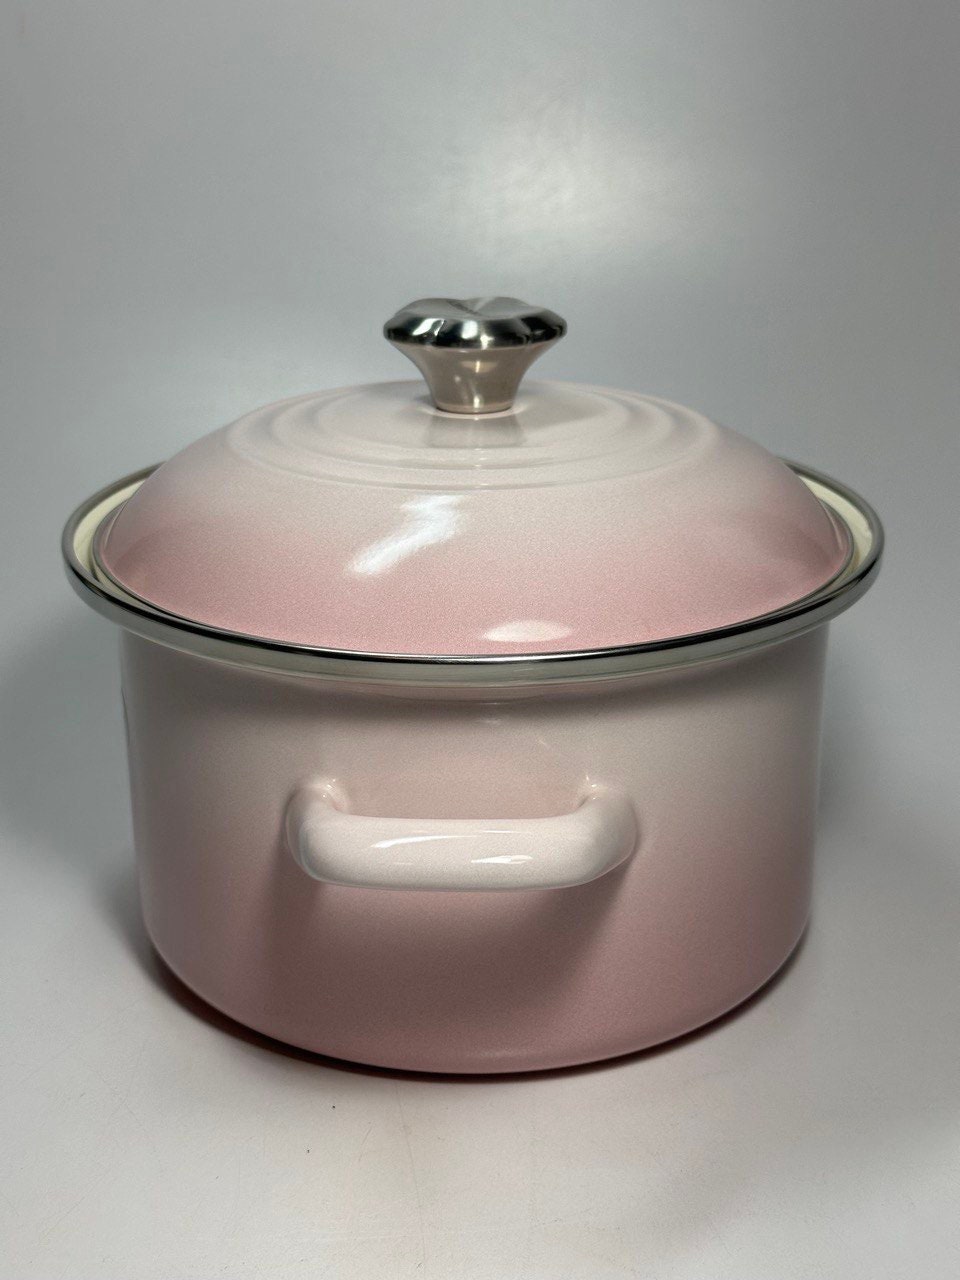 Dutch Oven Pot with Lid, Enameled Cast Iron Coated Deep 6QT, Pink